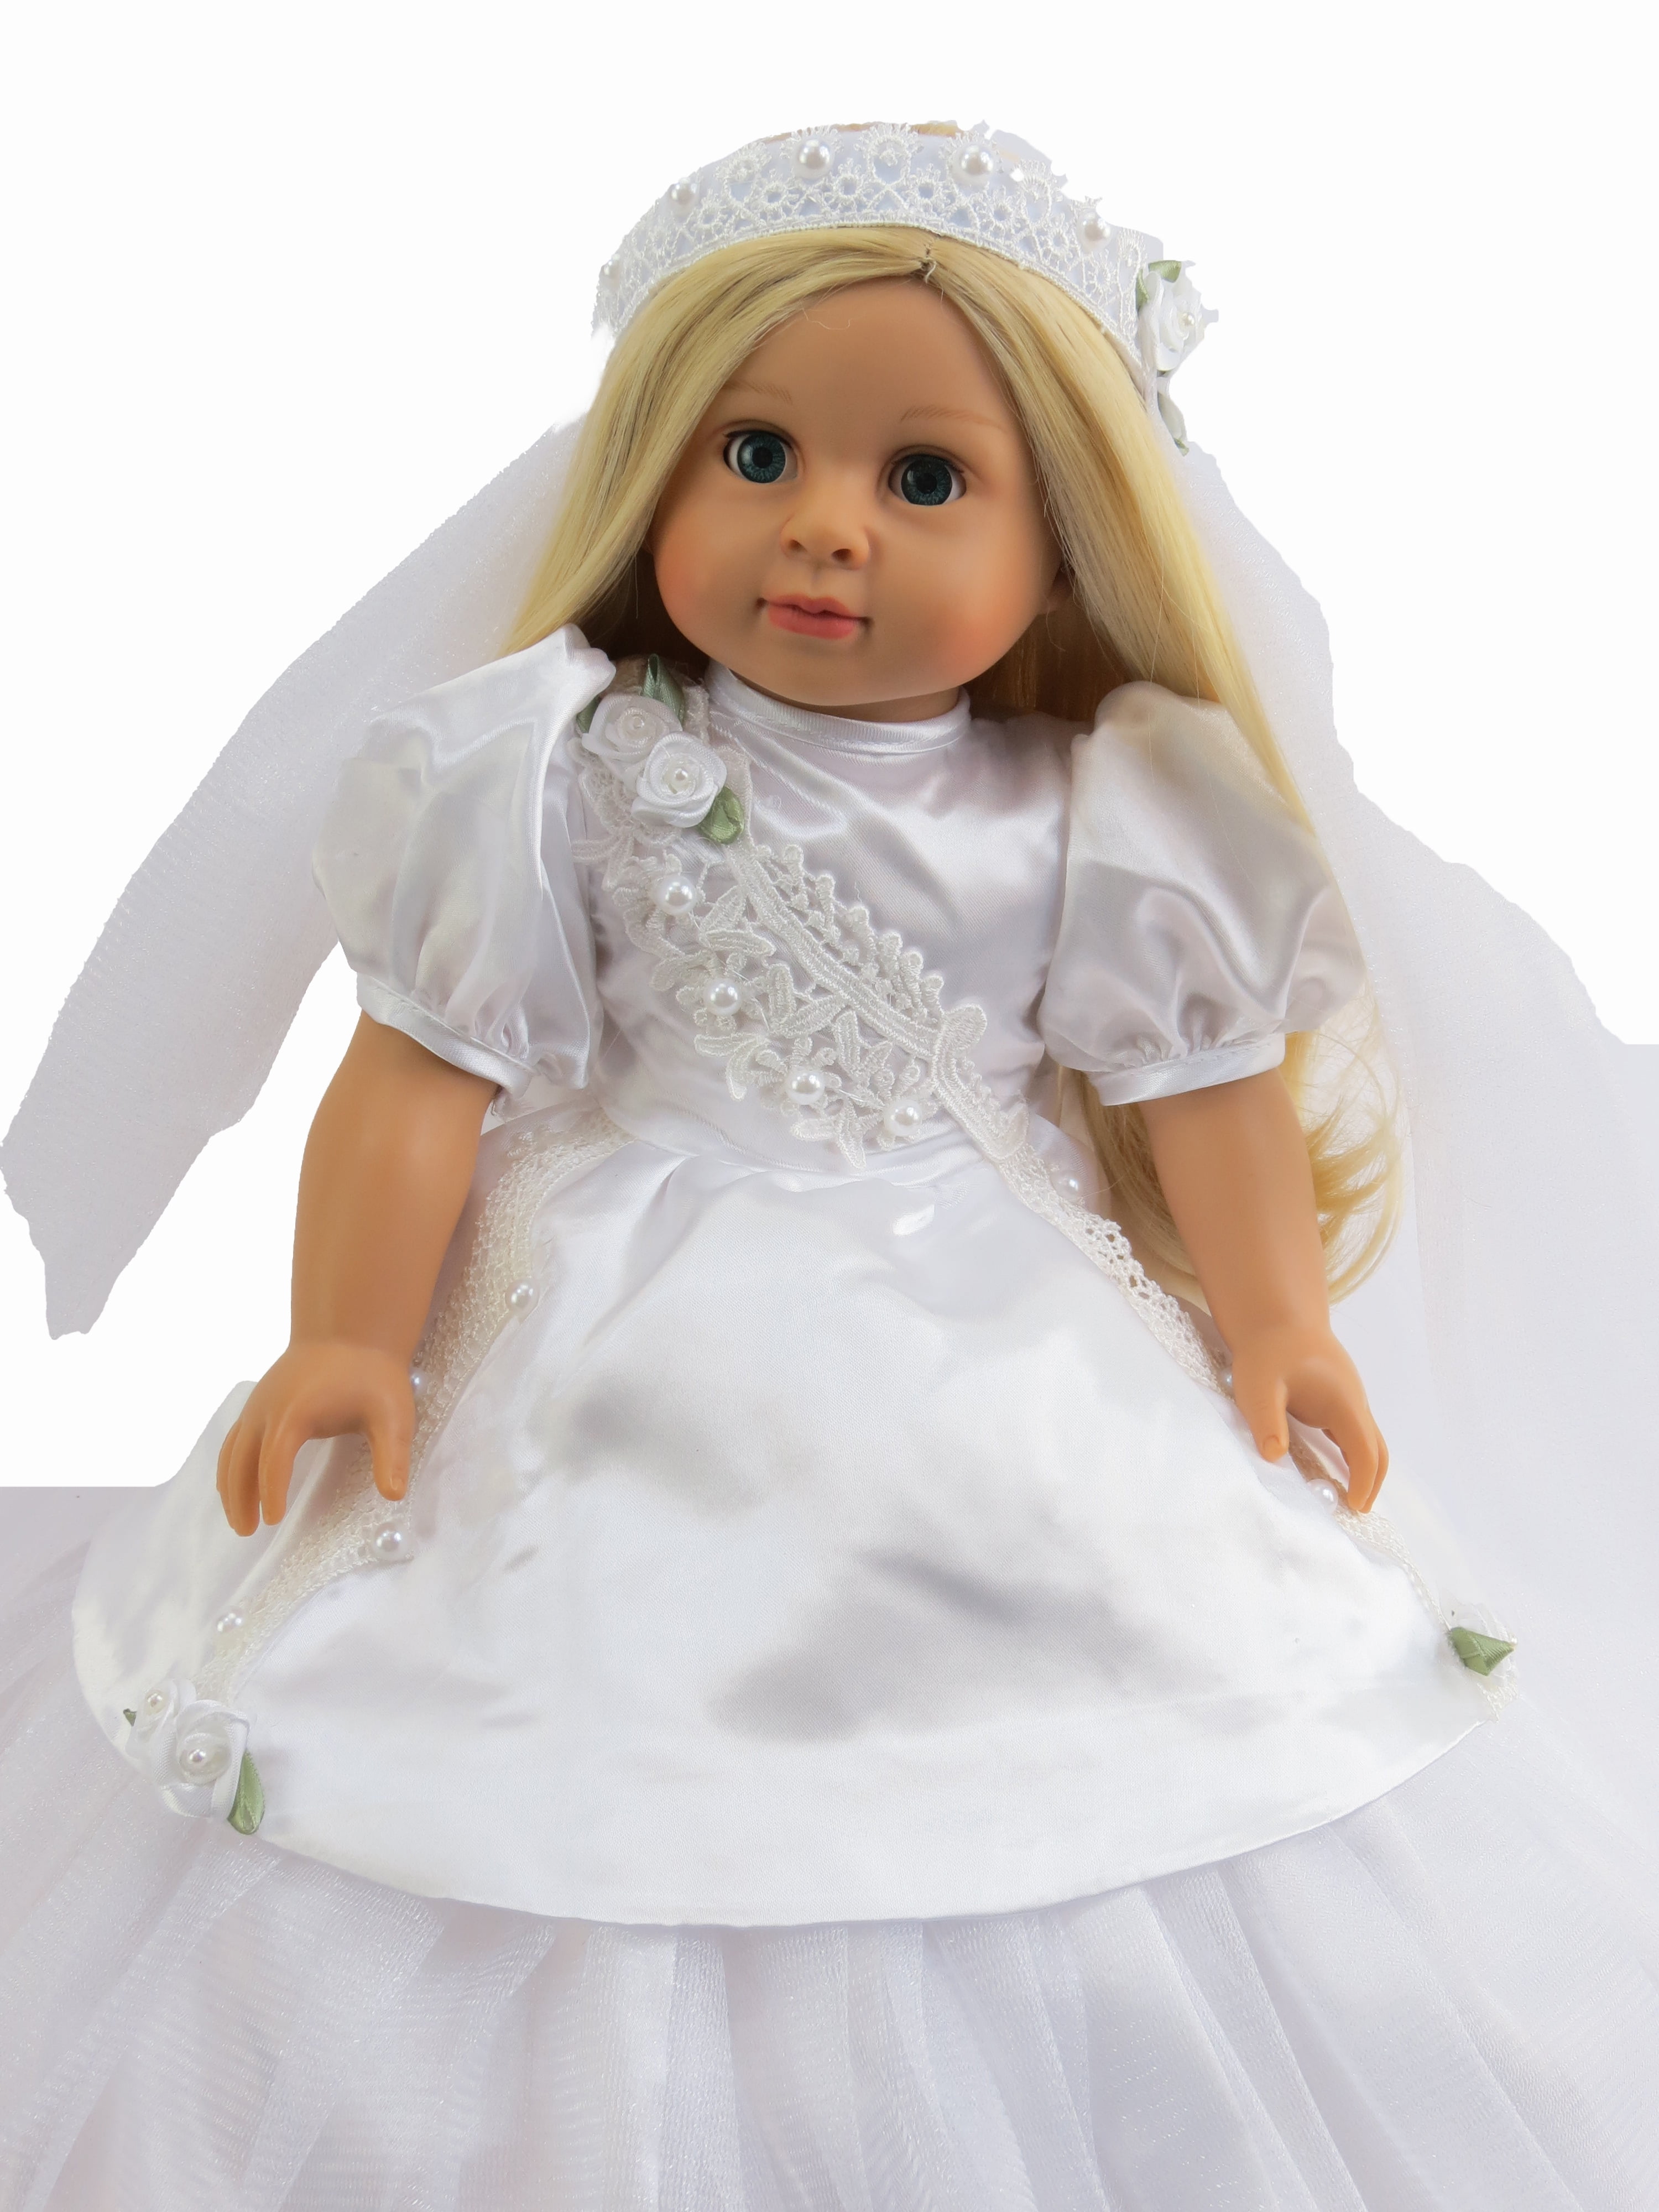 3 PCS KYToy 18 Inch Doll White Wedding Outfit for American Doll Clothes and Accessories Girl Bride Flower Pearl Wedding Dress Gown with Veil and Necklace Set